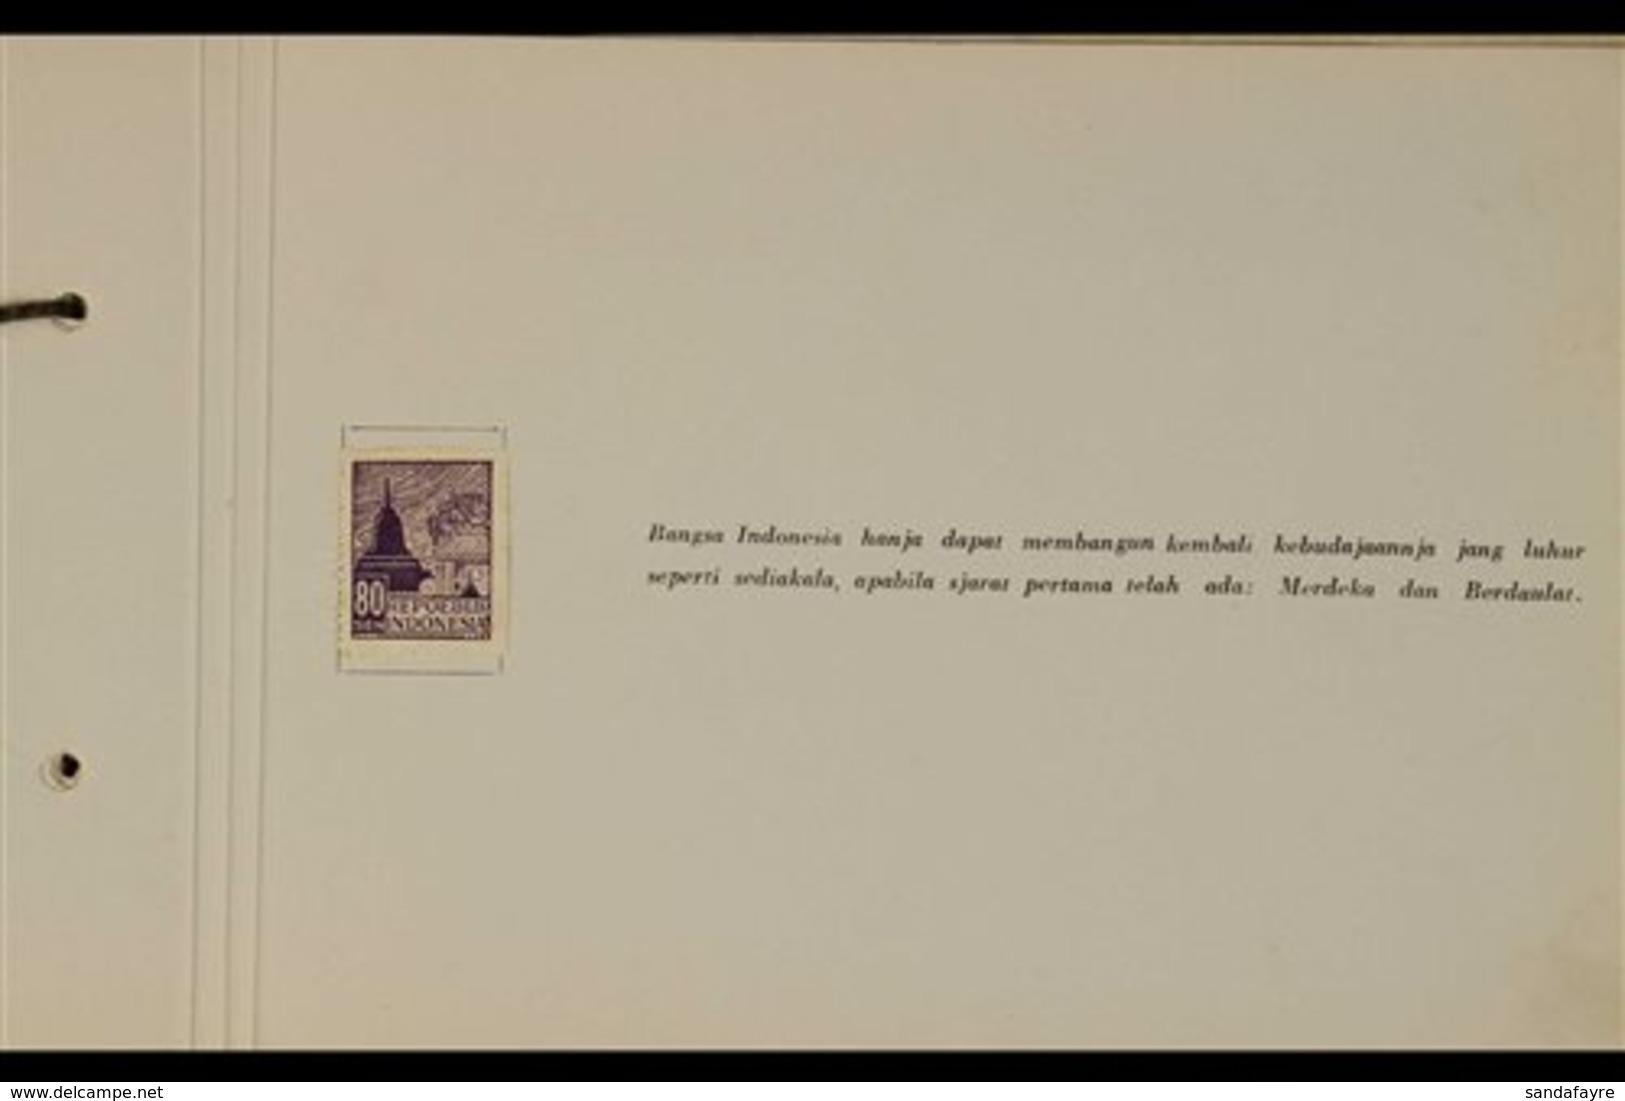 1945-1947  All Different Unused Stamps And Postal Stationery Cards In A Special Presentation Album Handstamped "With The - Indonesia